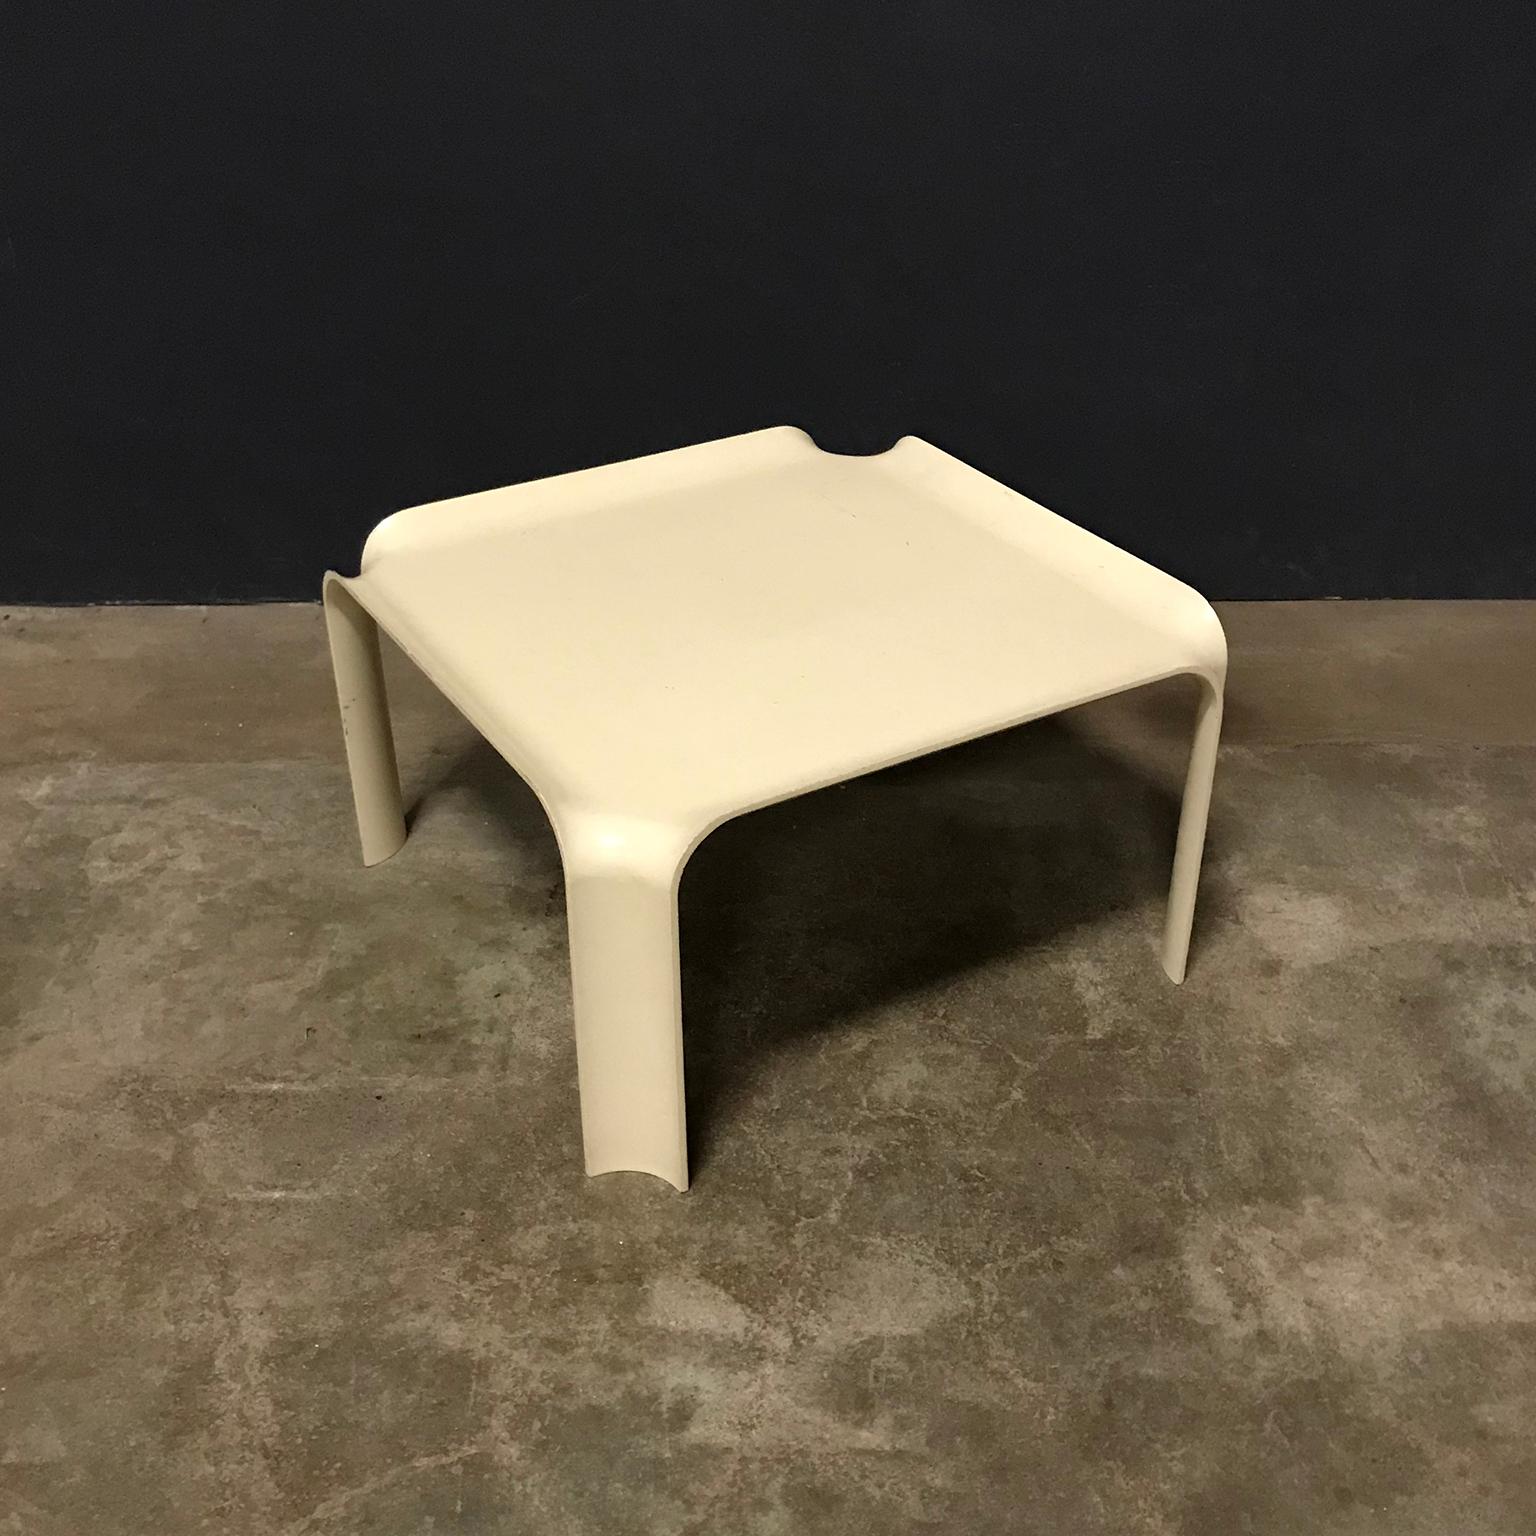 Side table in offwhite by Pierre Paulin. The table shows traces of wear like some stains, some tiny spots of paint, some minor scratches and tiny damages on the edge (see pictures).
Side table in brown is listed as well.

Weight 2 kg
The height